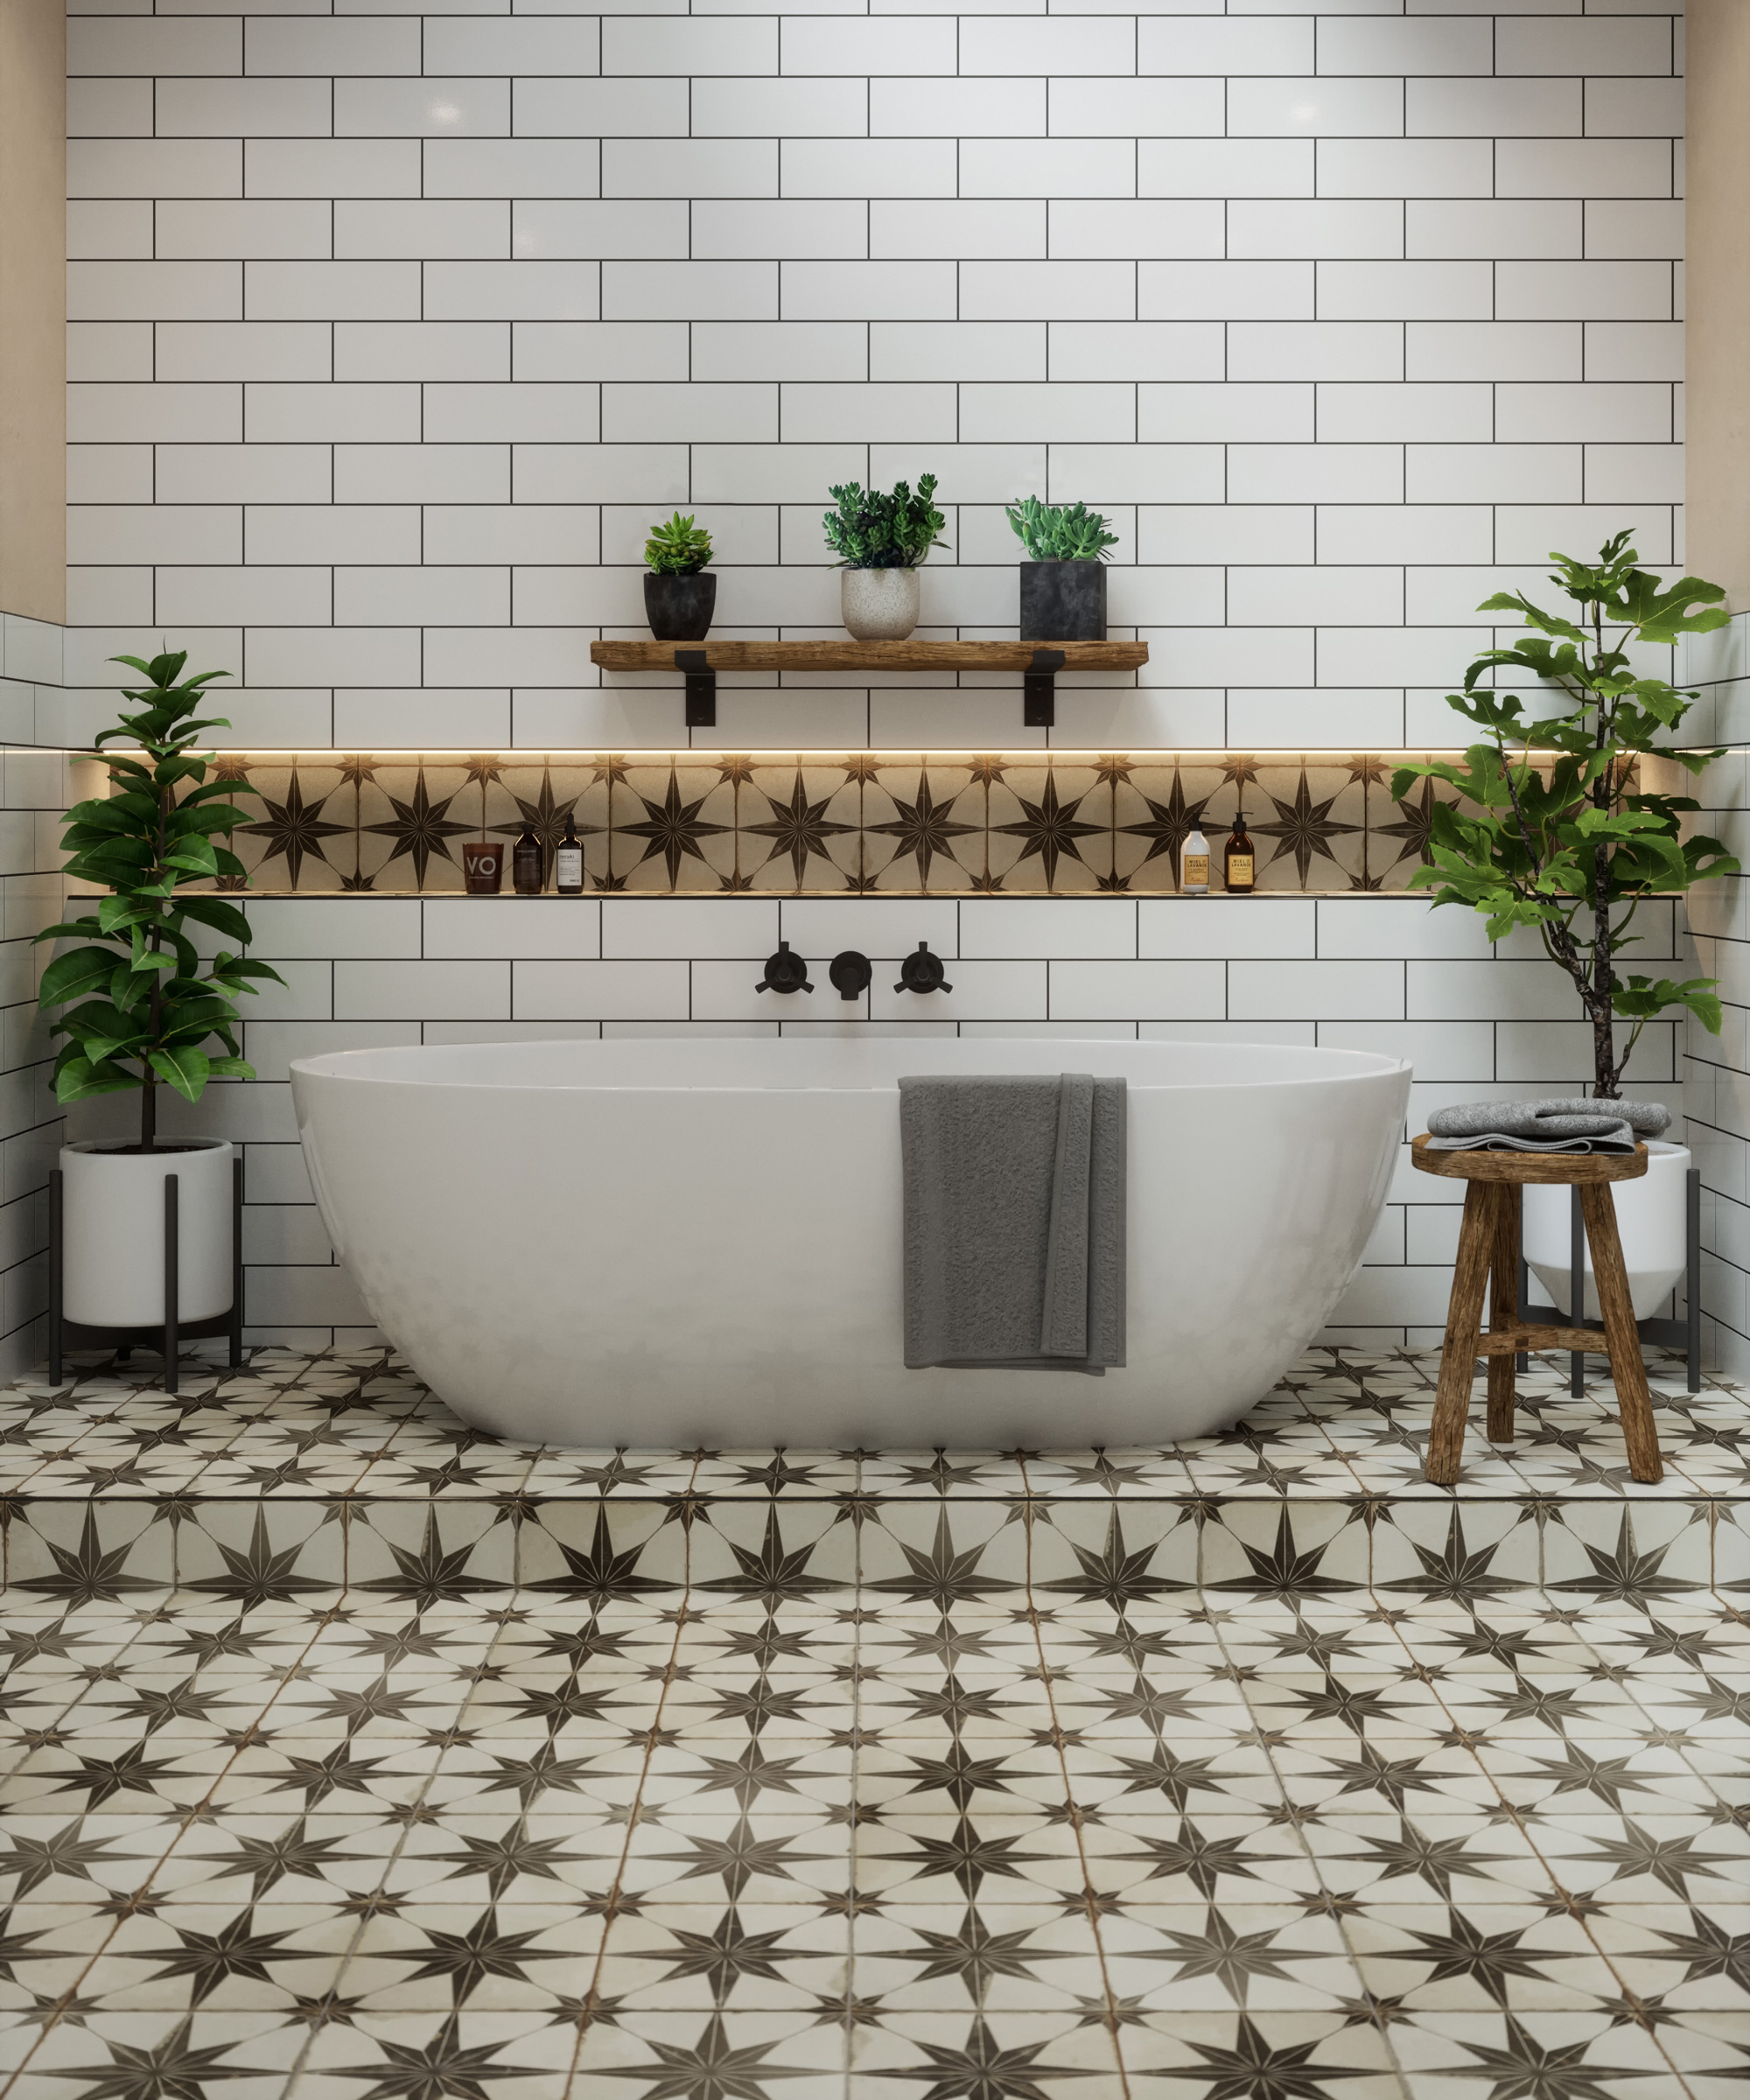 Bathroom Tile Ideas 32 New Looks To, Can You Just Retile A Bathroom